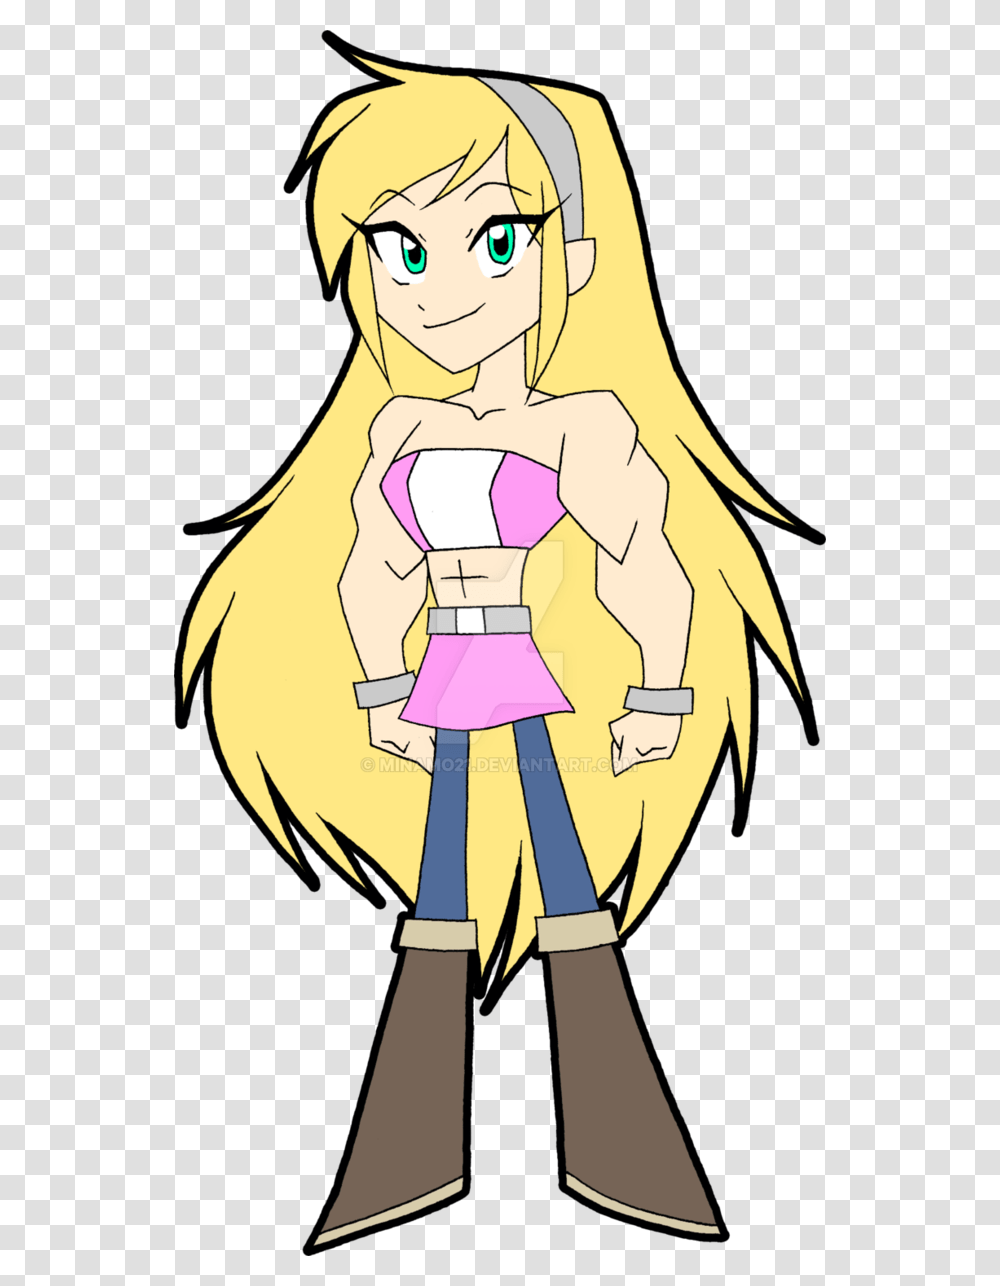 Muscle Girl By Minamo21 Little Muscle Girl Anime, Manga, Comics, Book, Person Transparent Png